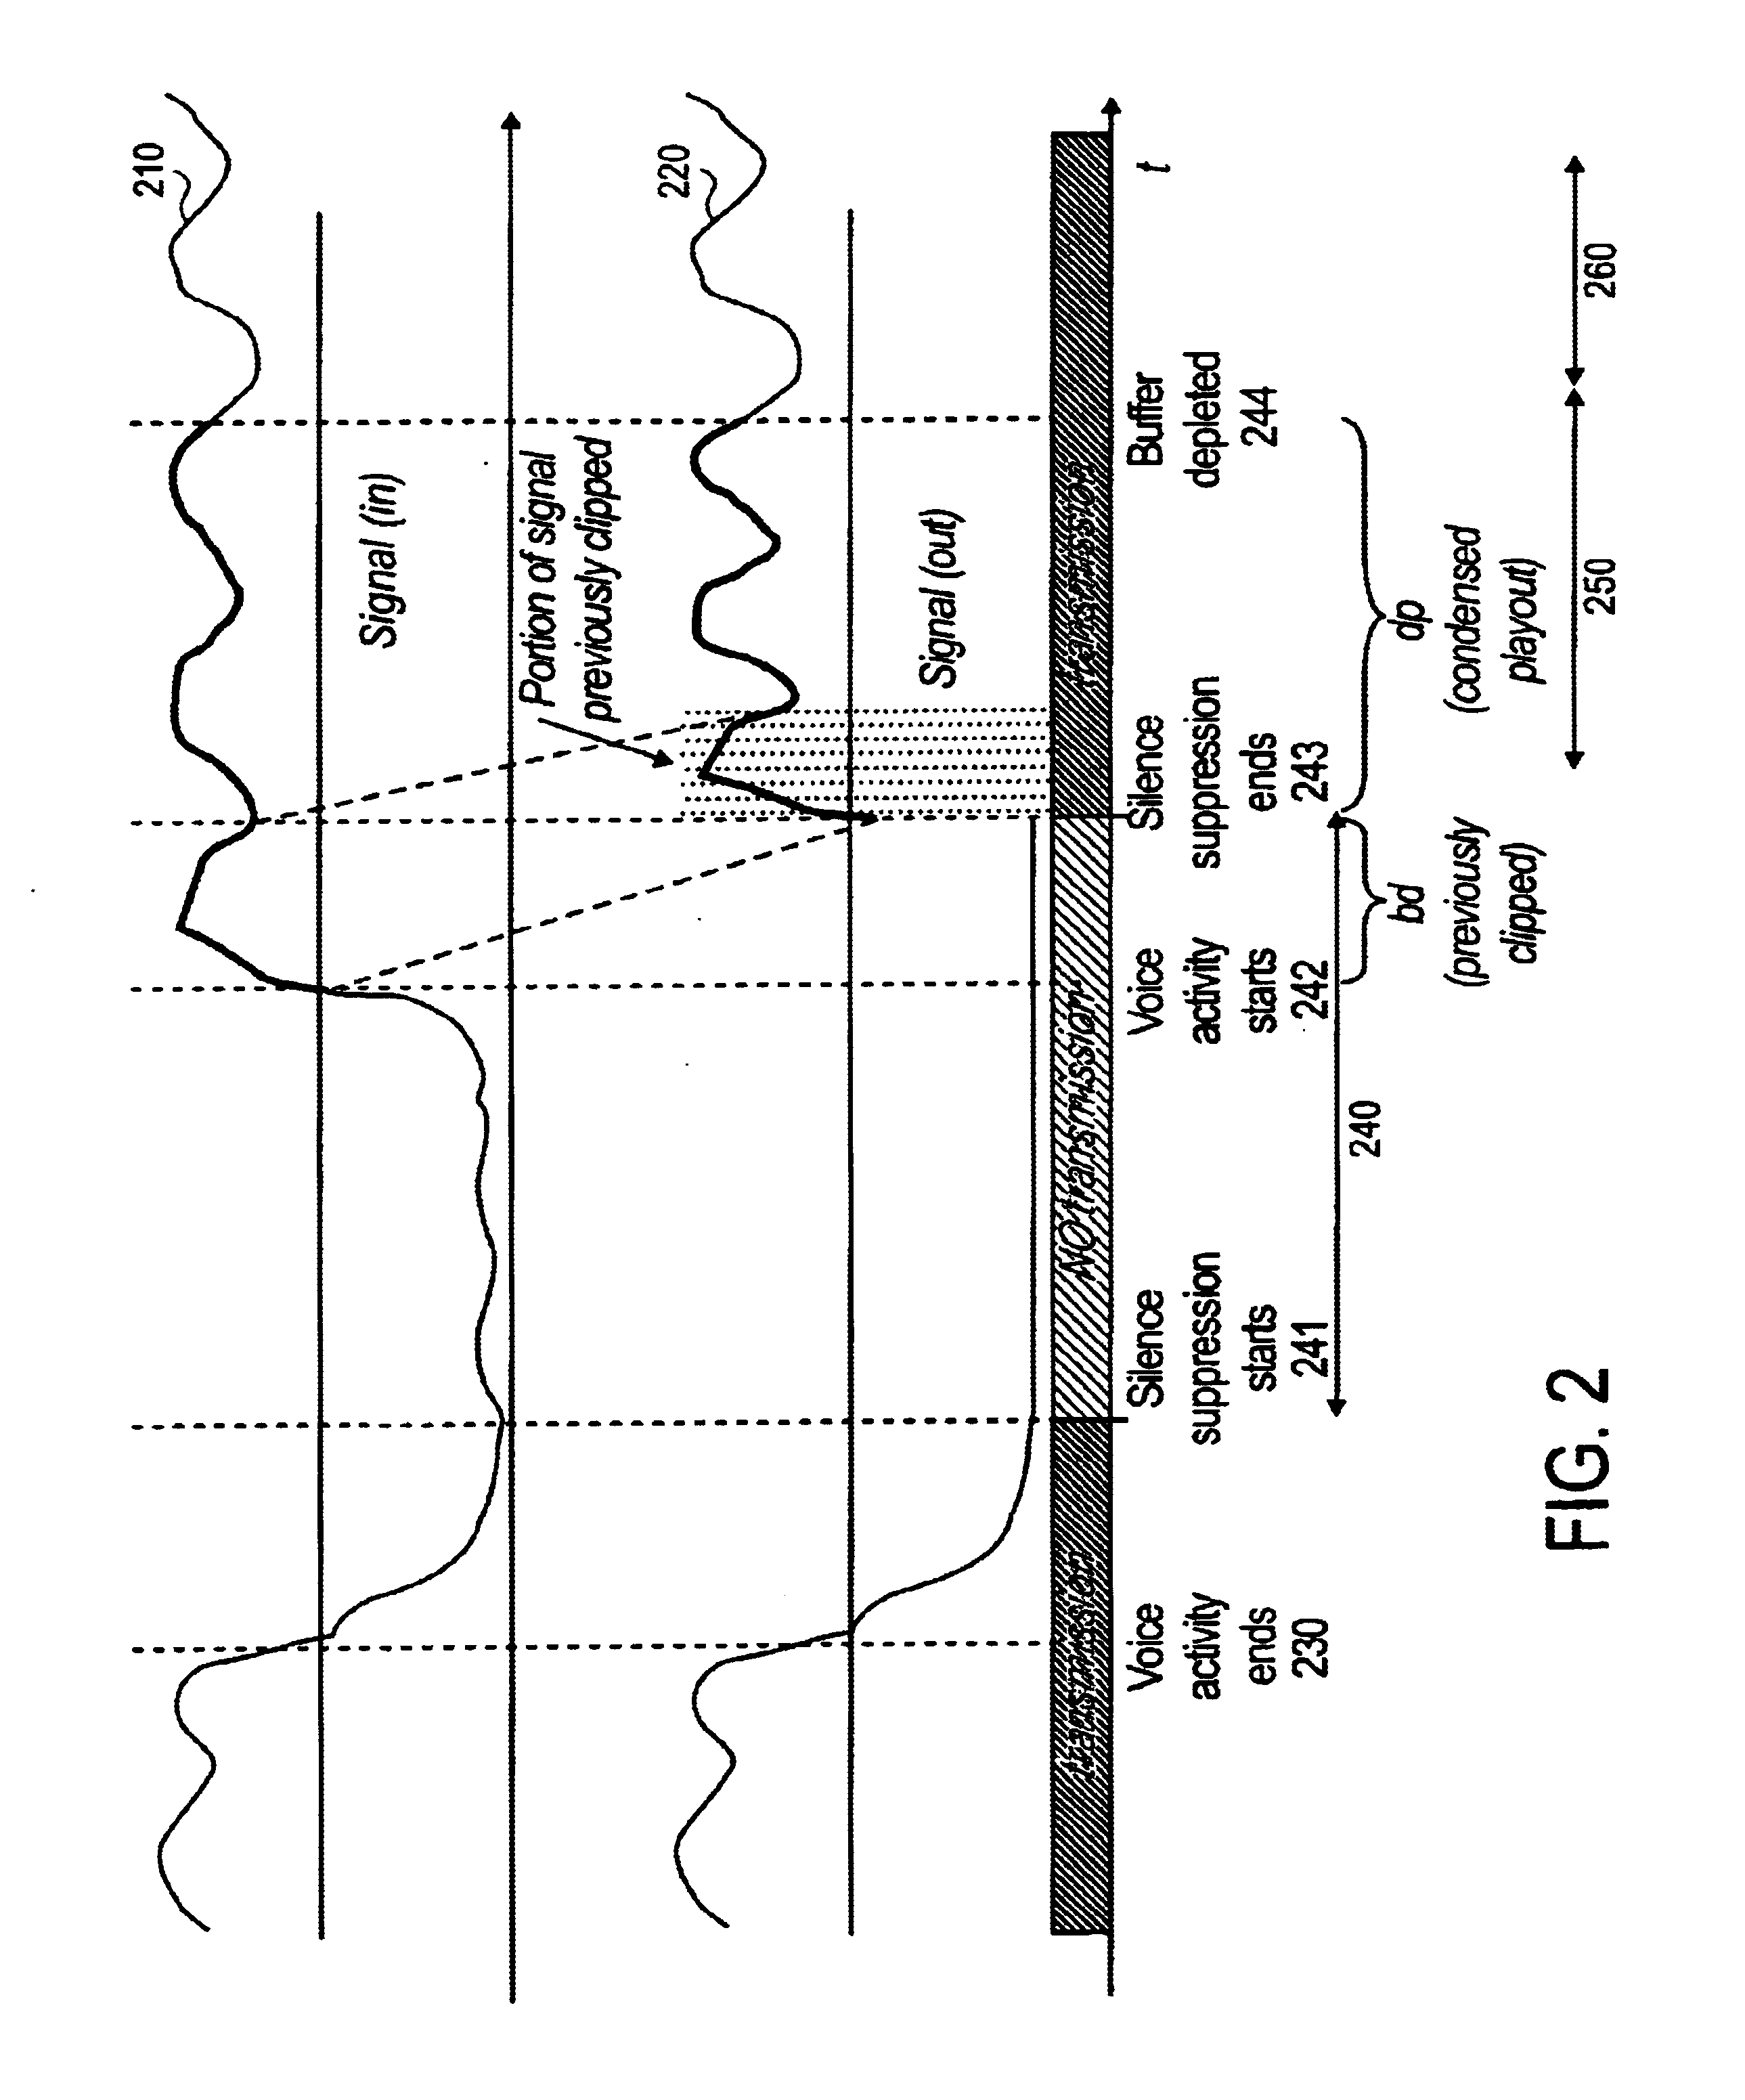 Elimination of clipping associated with VAD-directed silence suppression